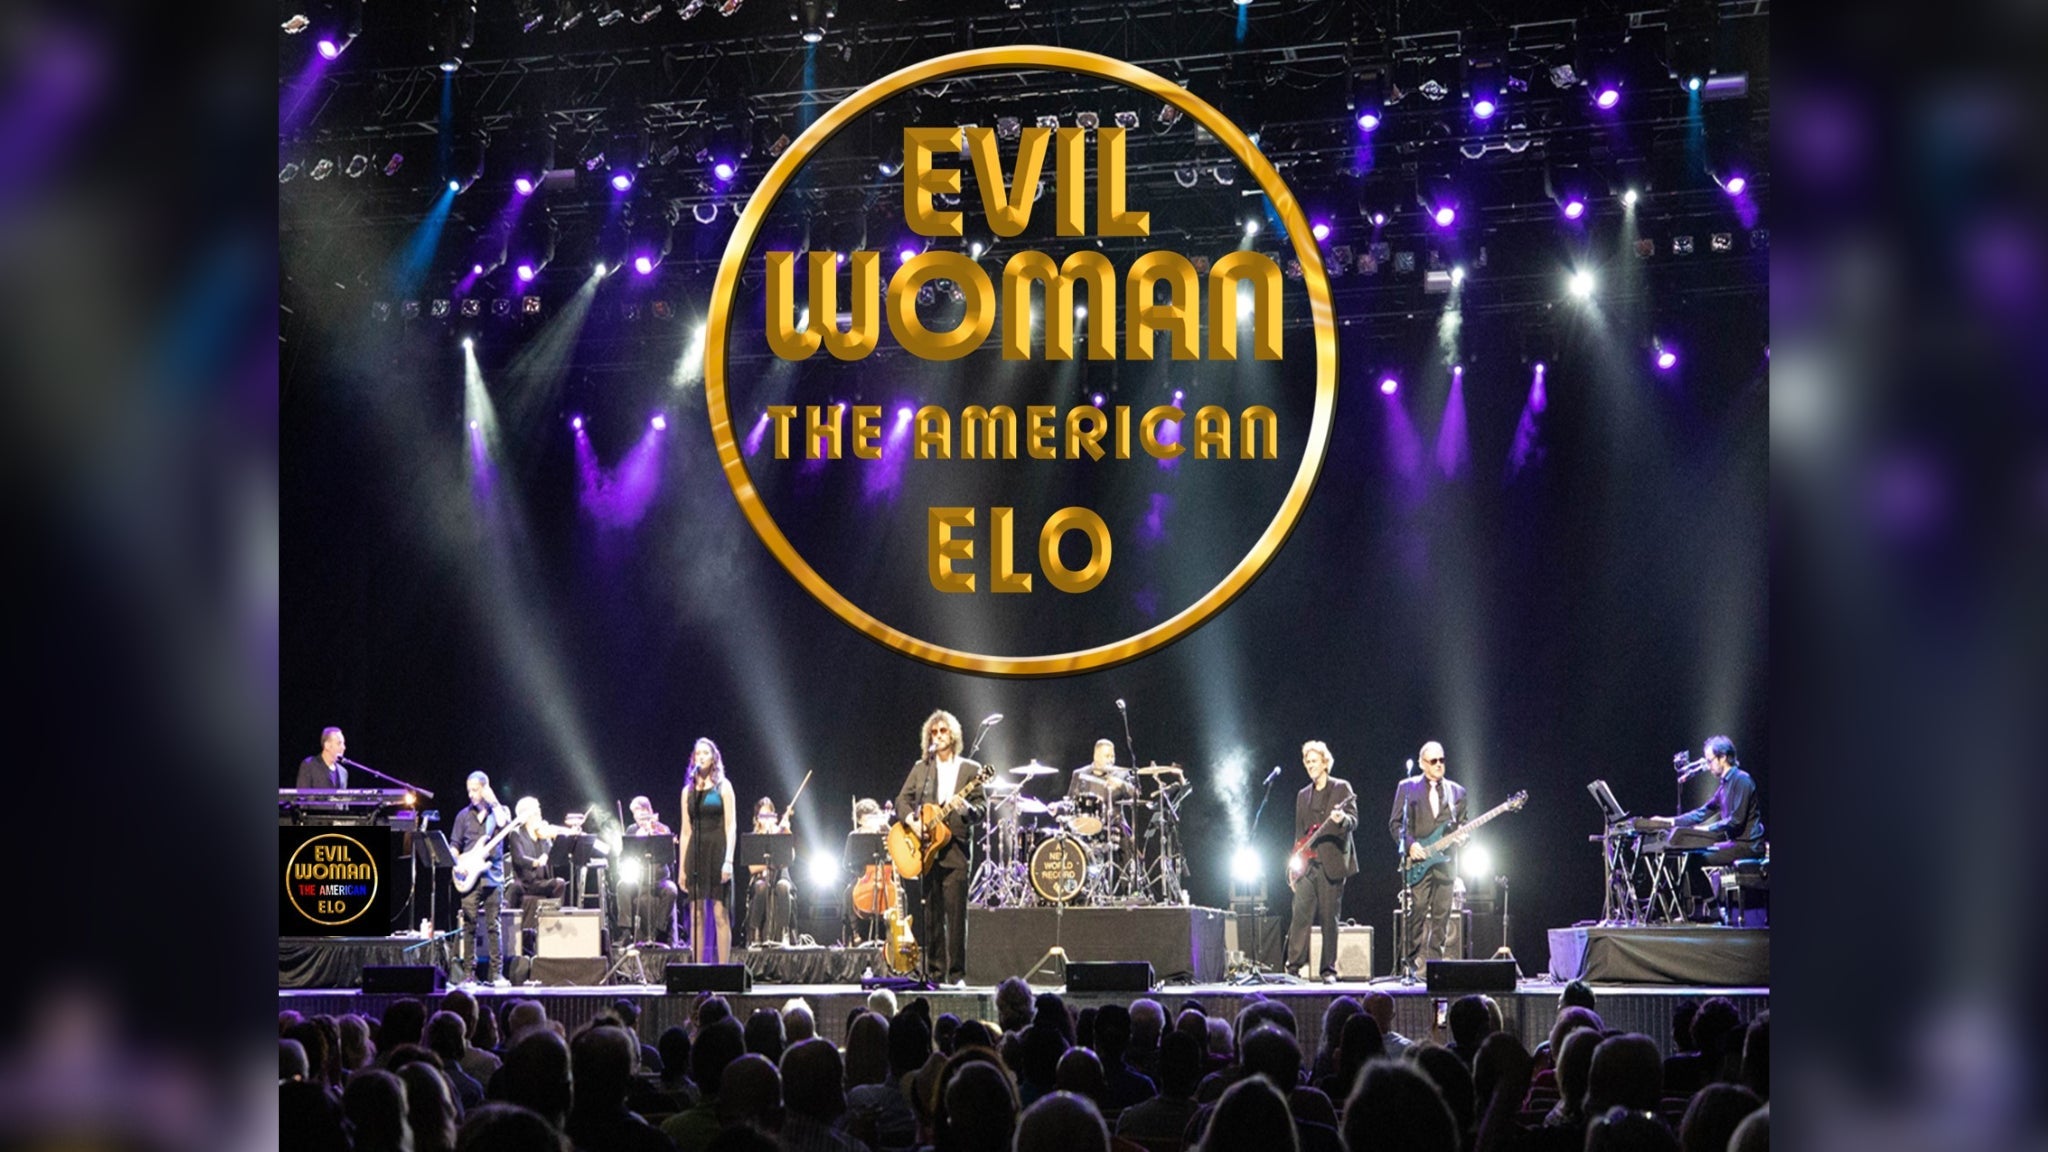 An Evening With Evil Woman - The American ELO